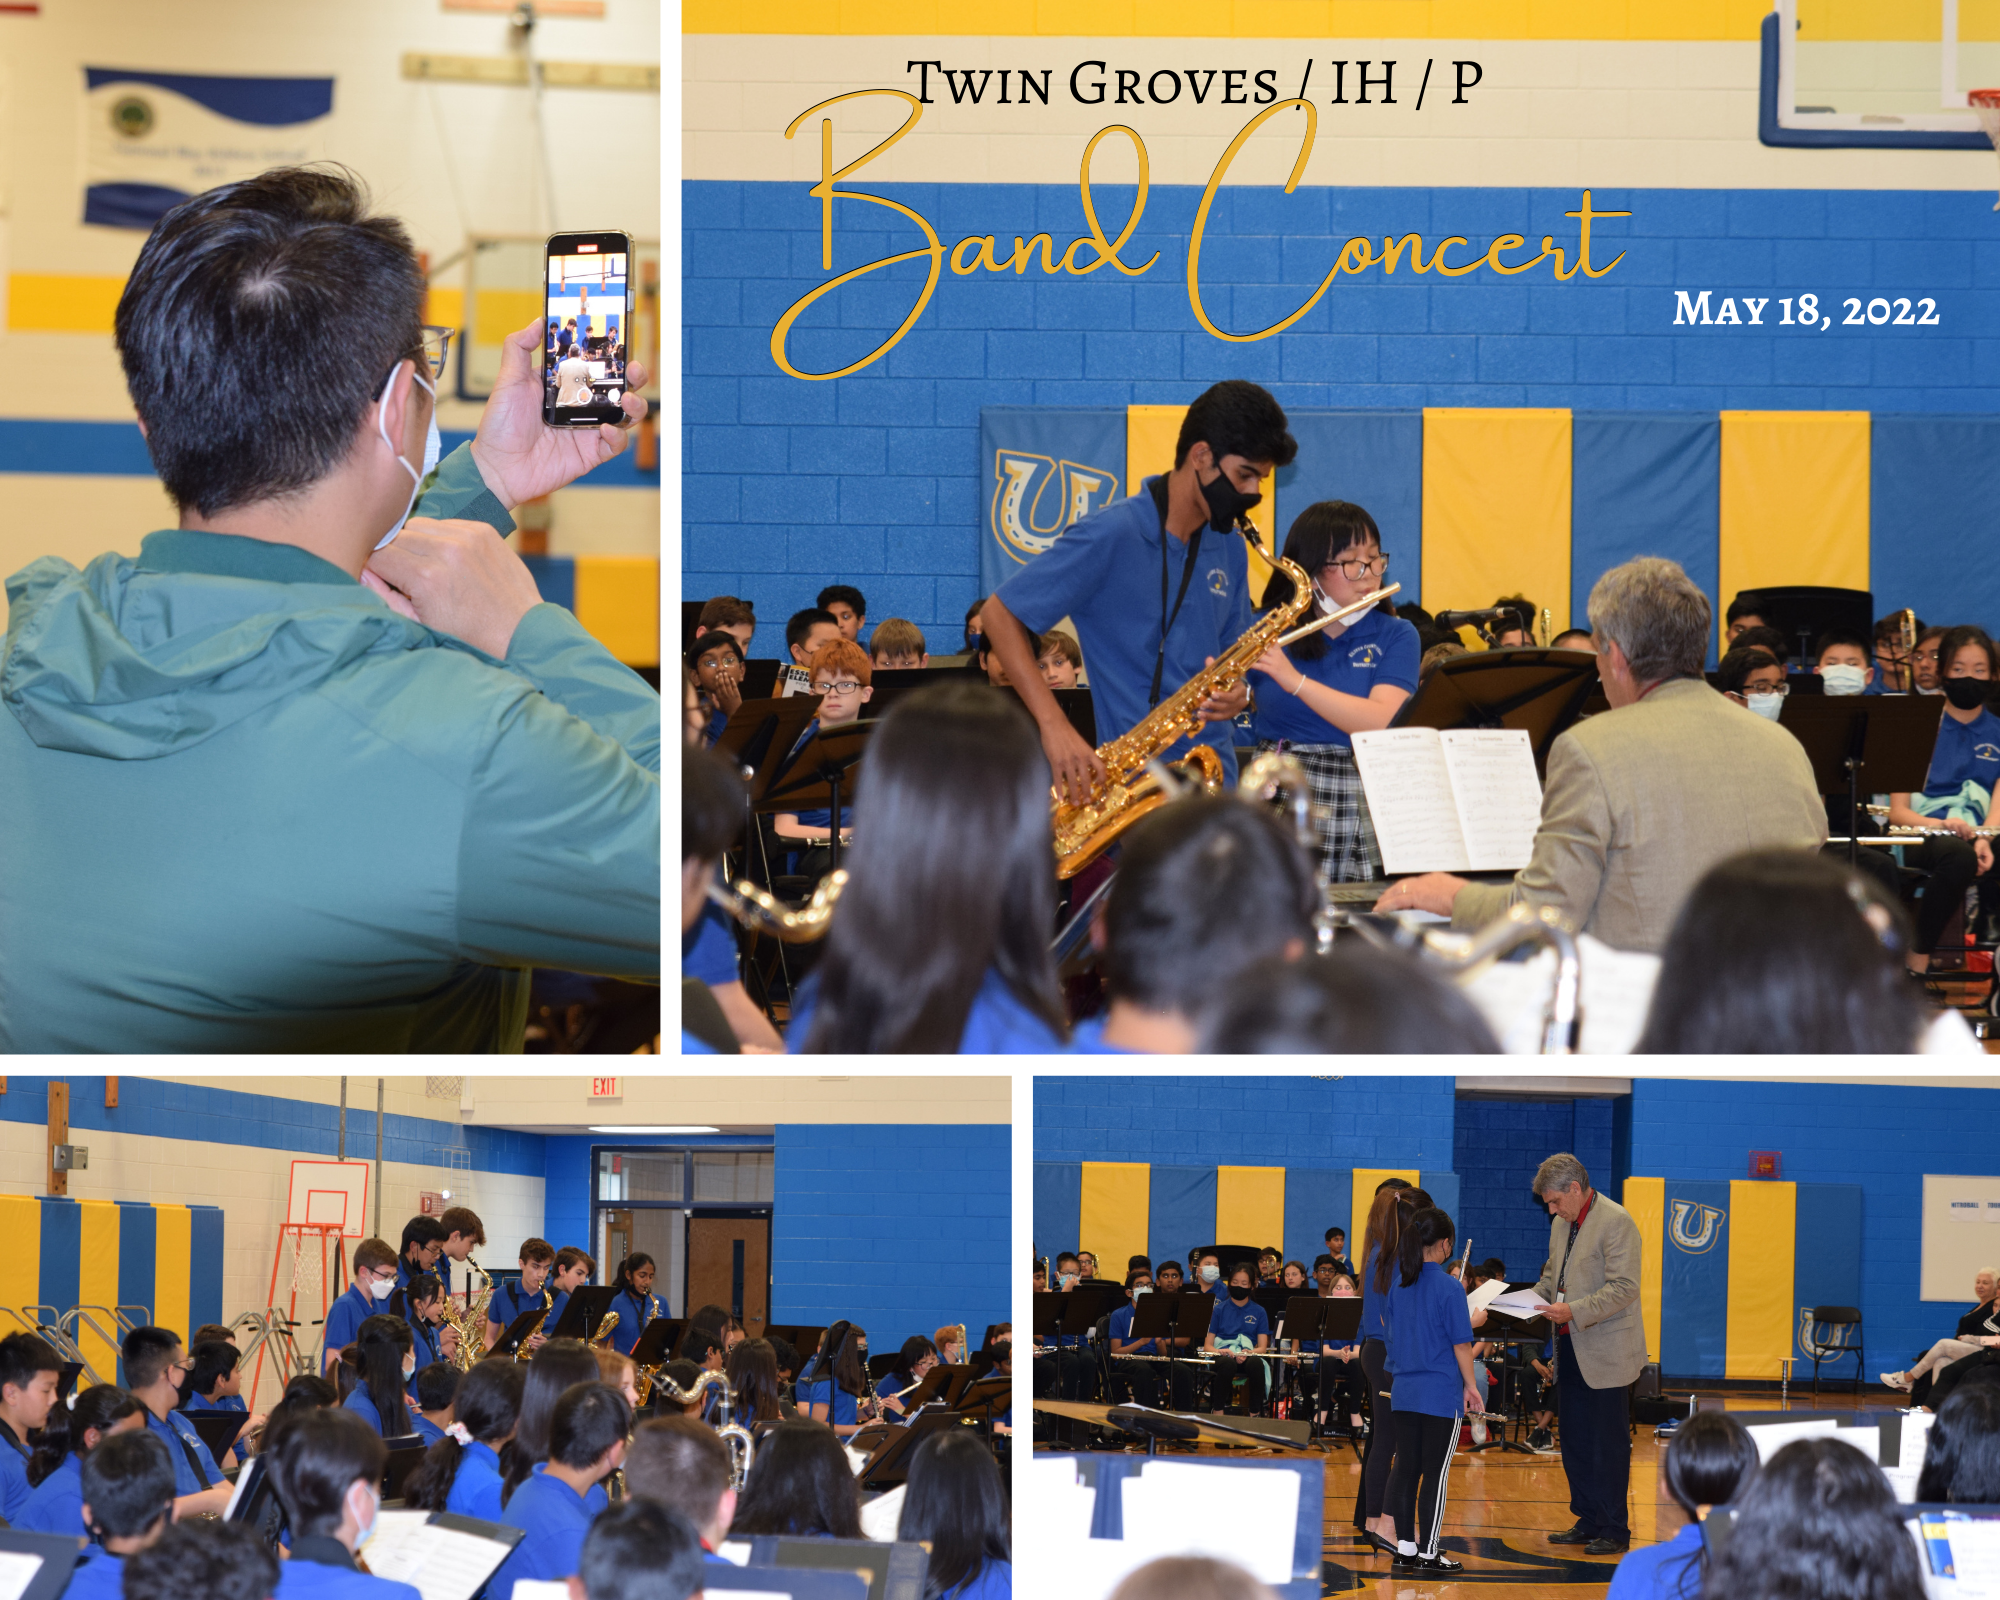 Twin Groves Band Collage, May 18, 2022